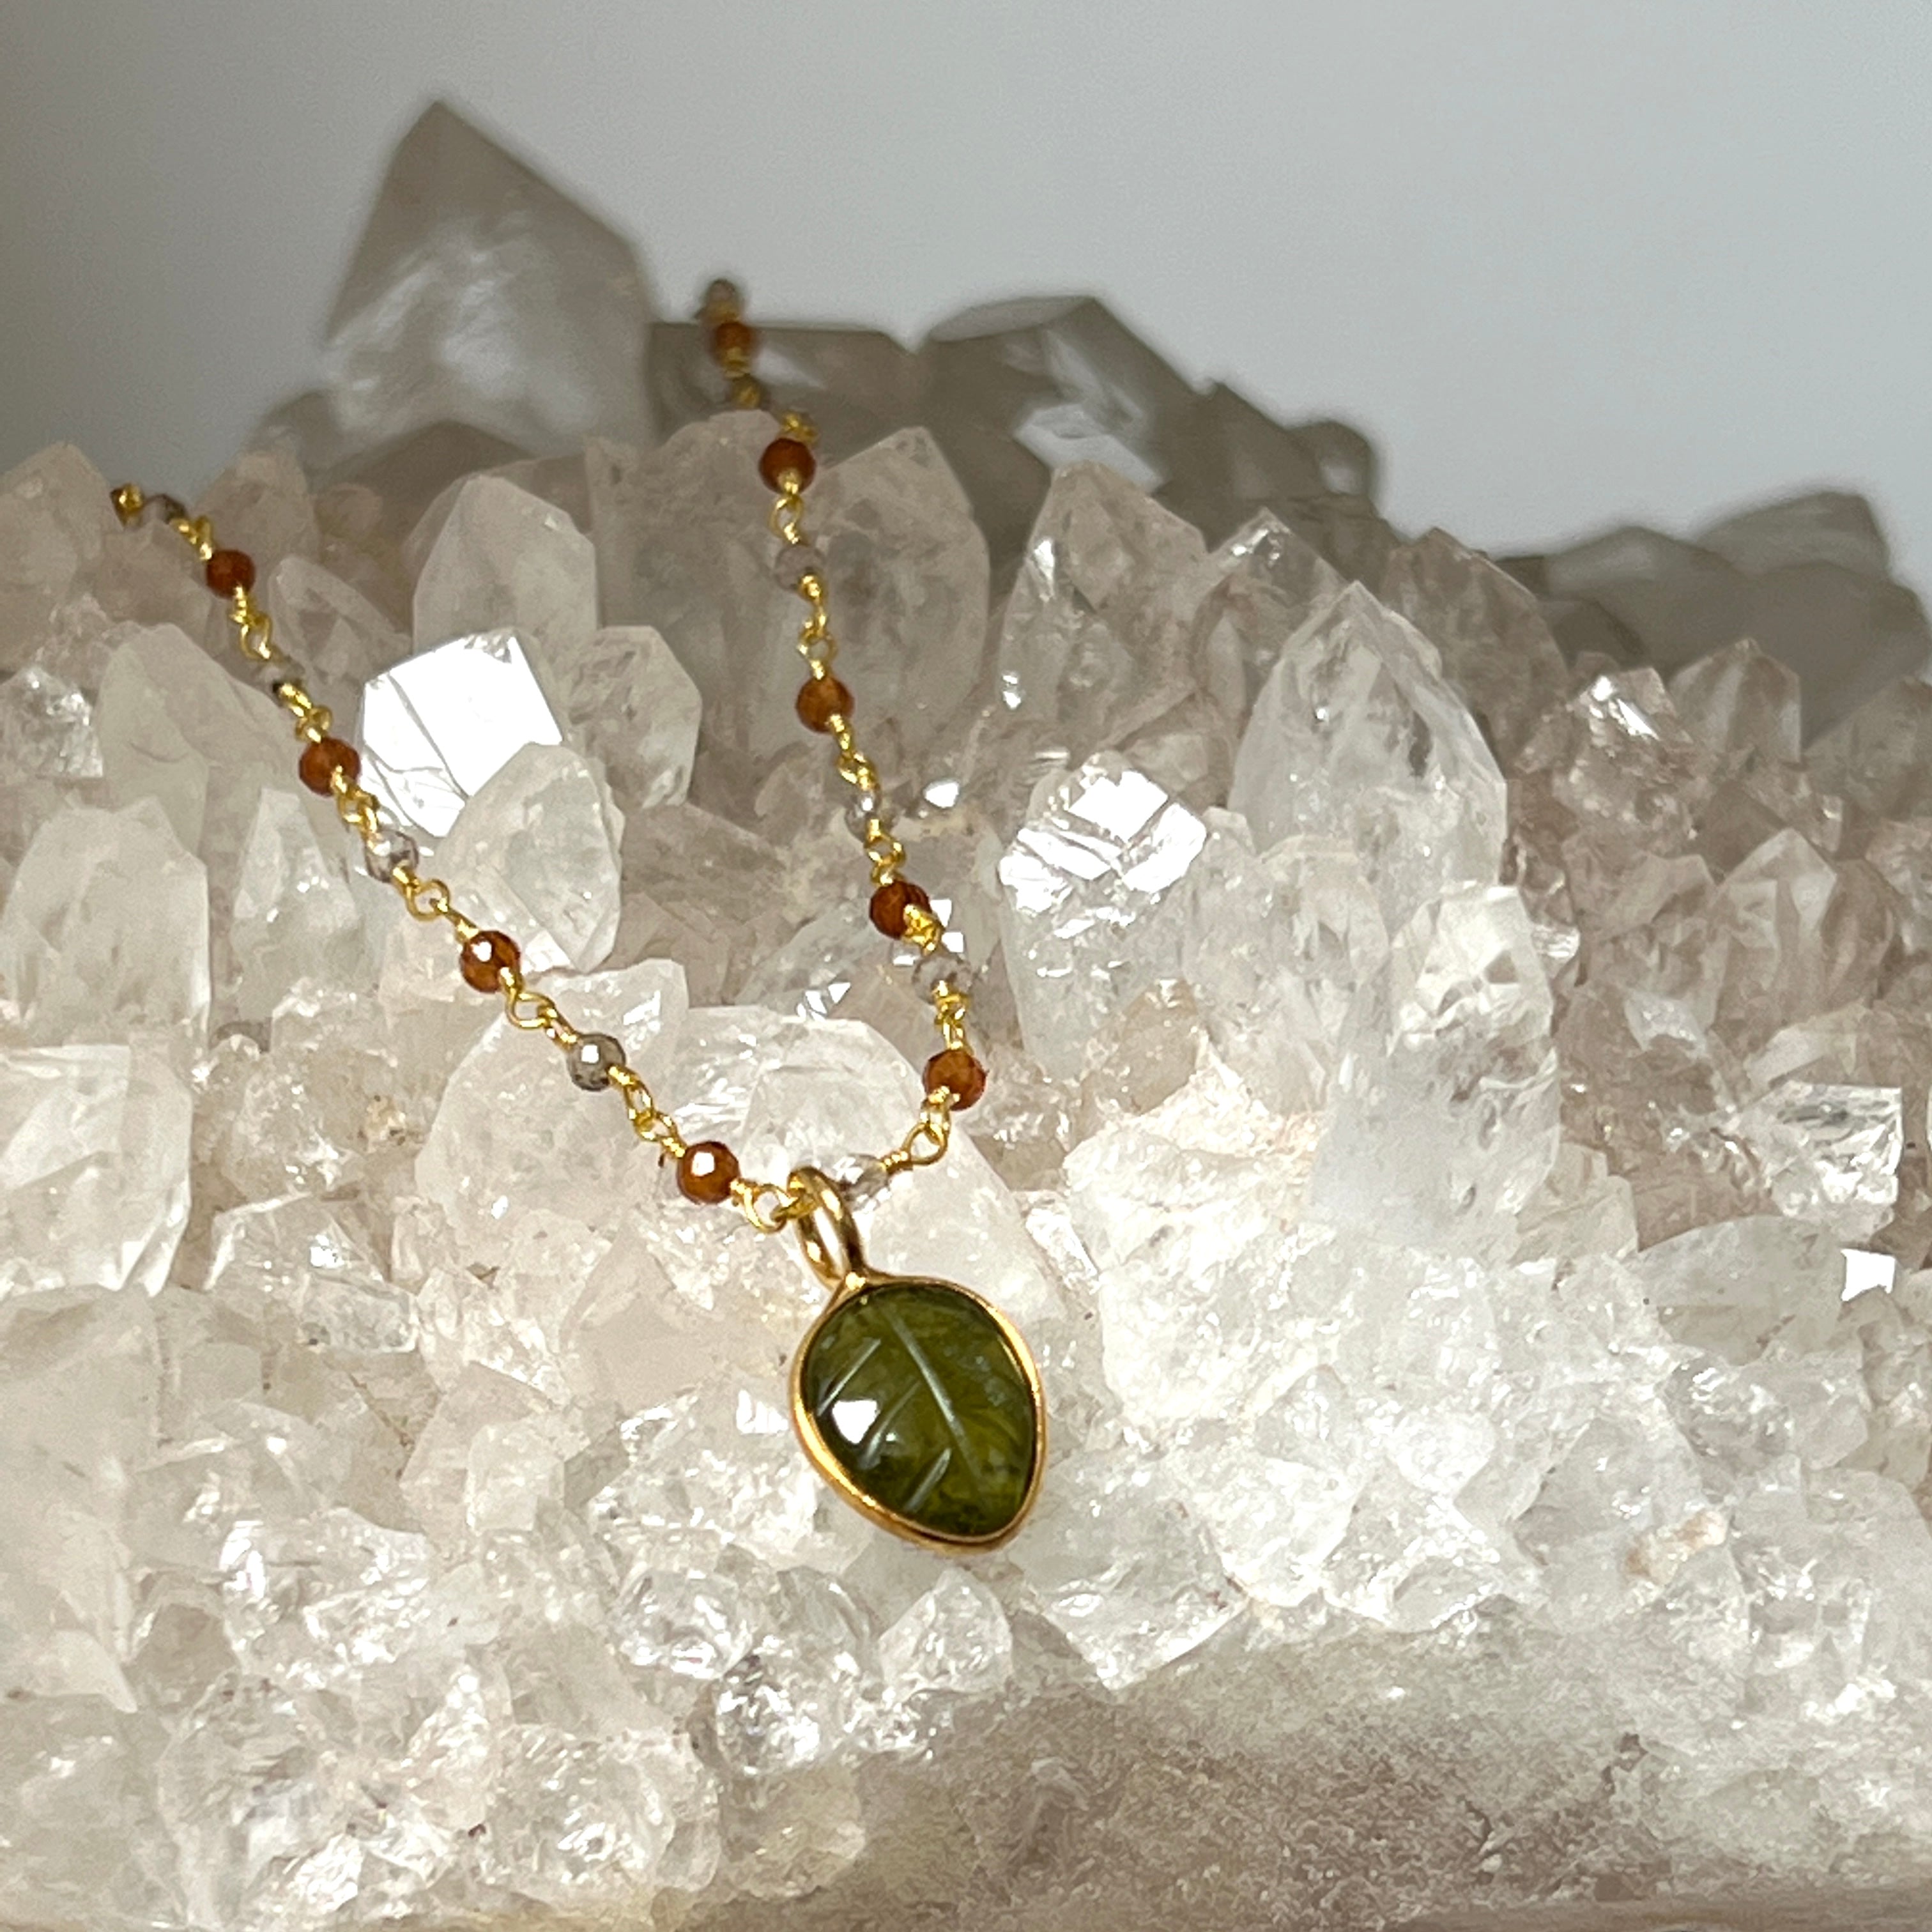 Citrine and Smokey Quartz rosary with carved peridot leaf pendant